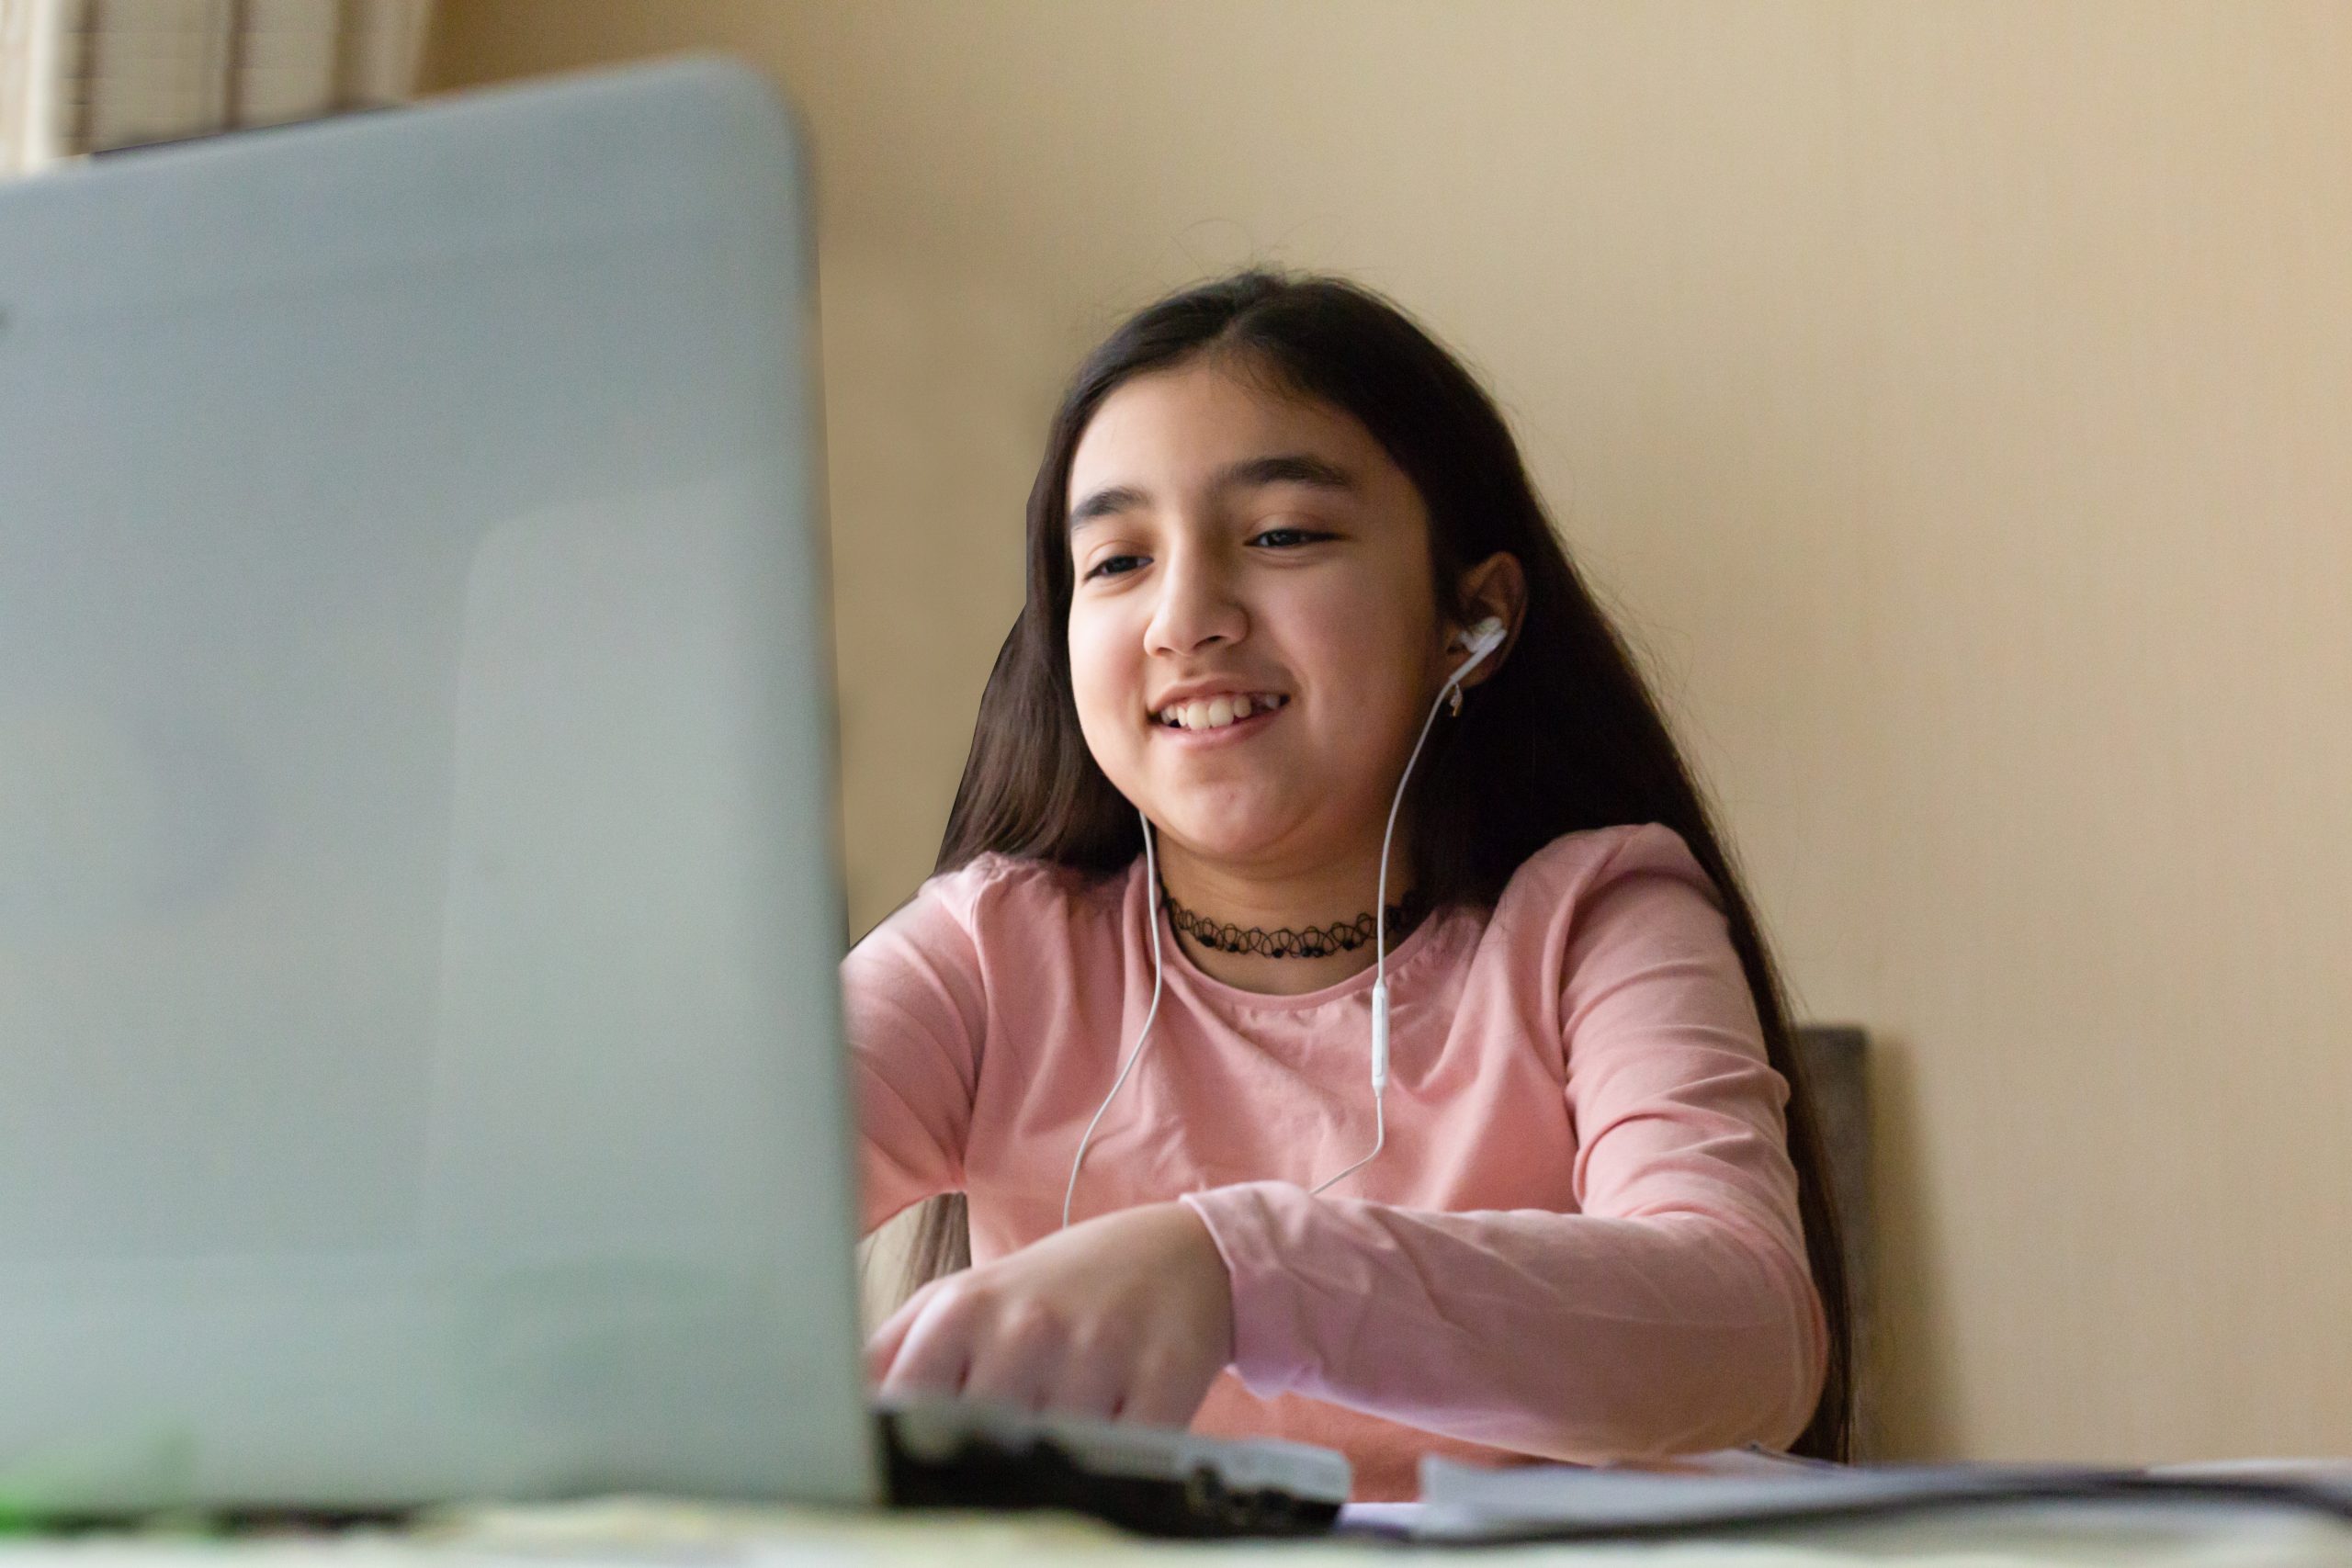 A student smiles while sitting in front of a laptop, wearing headphones